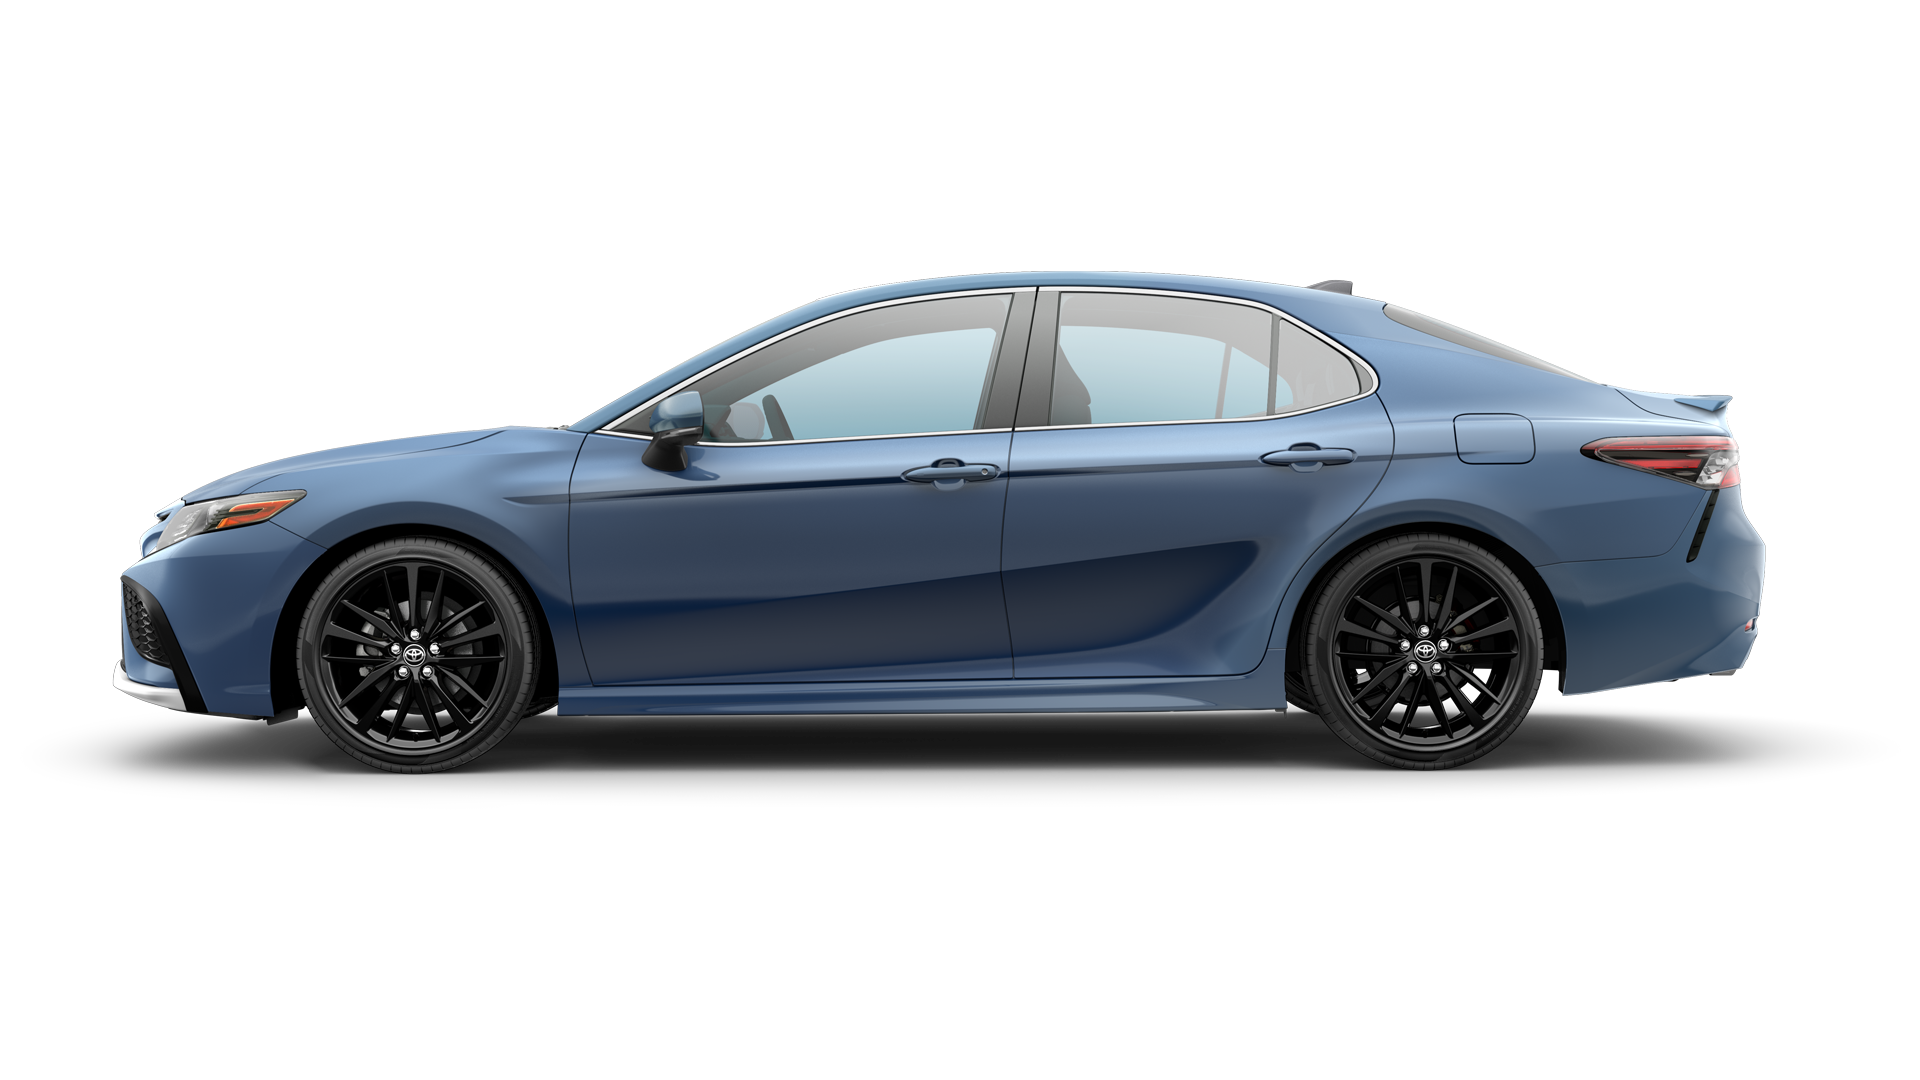 2023 Toyota Camry in Cavalry Blue.